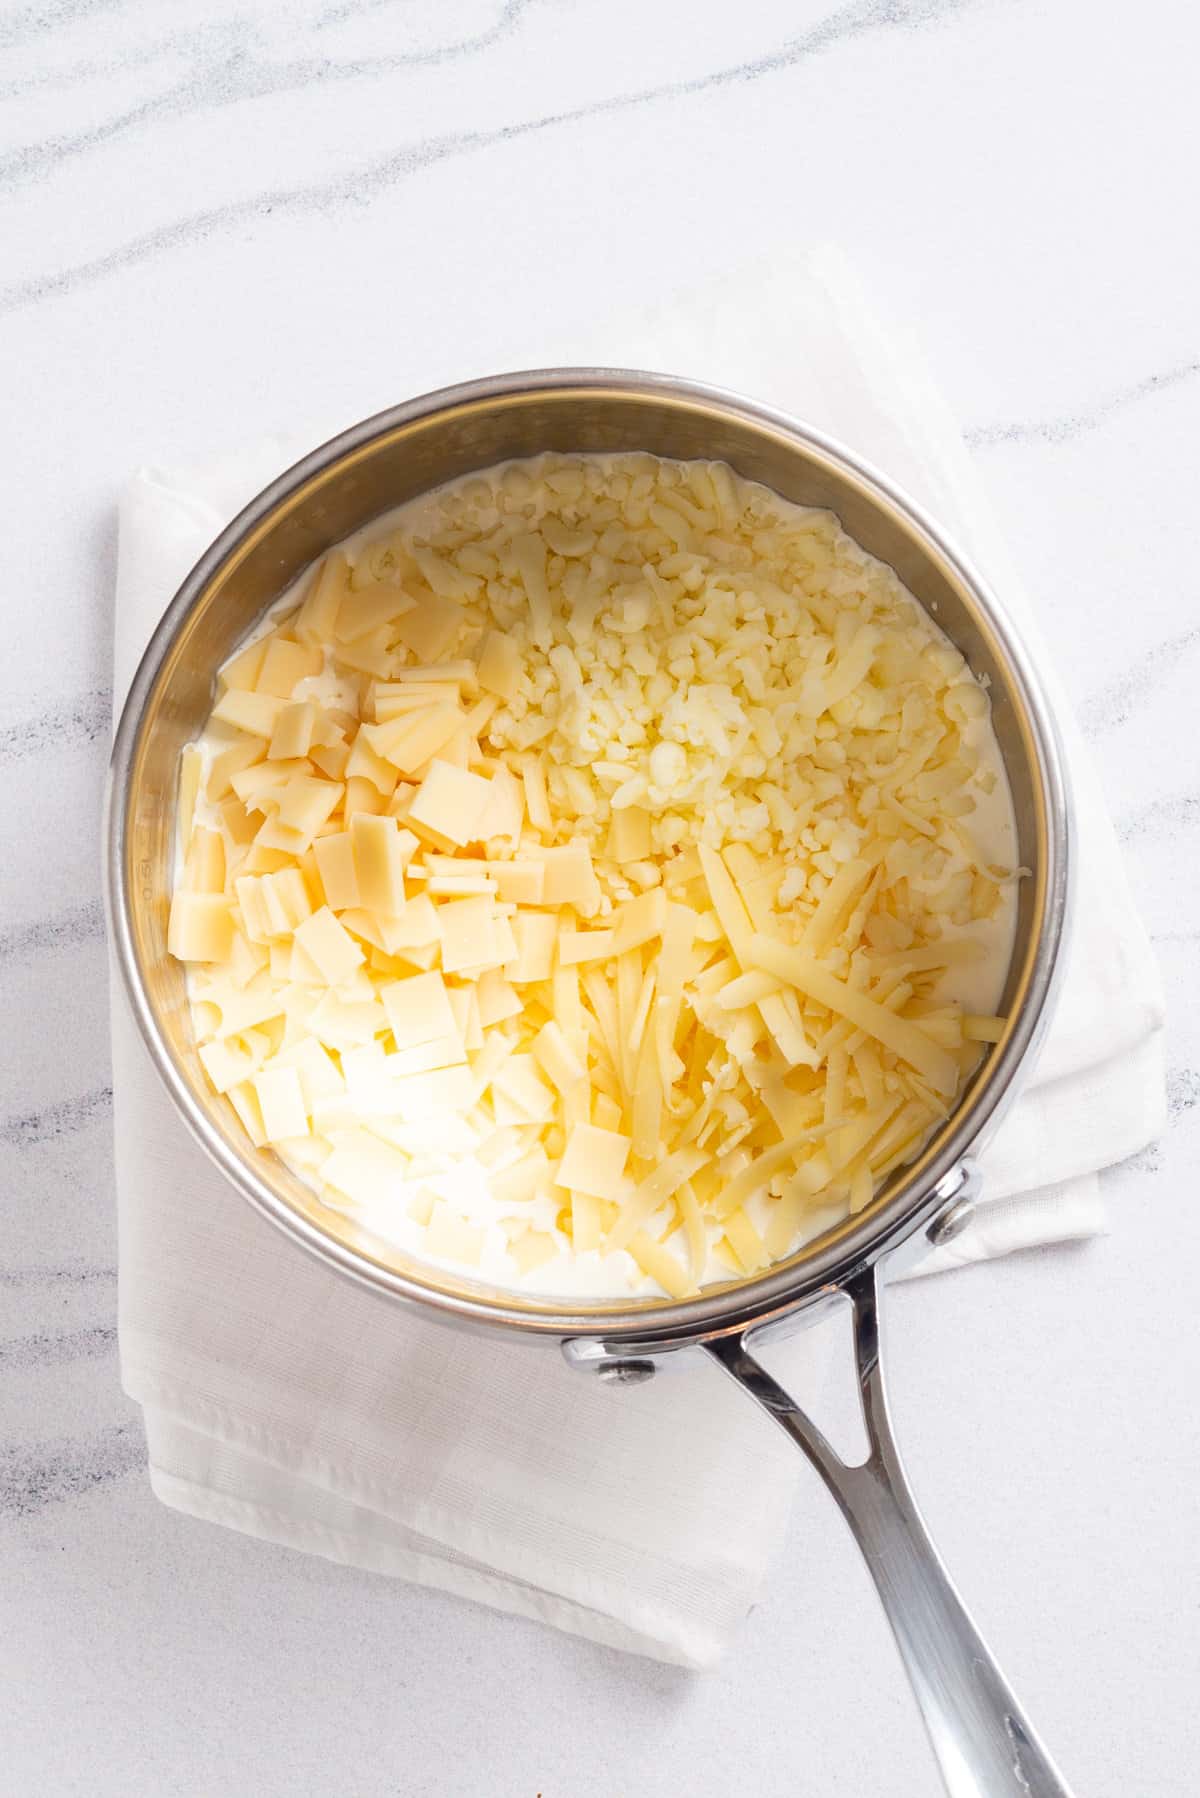 An image of 3 types of cheese combined in a saucepan.